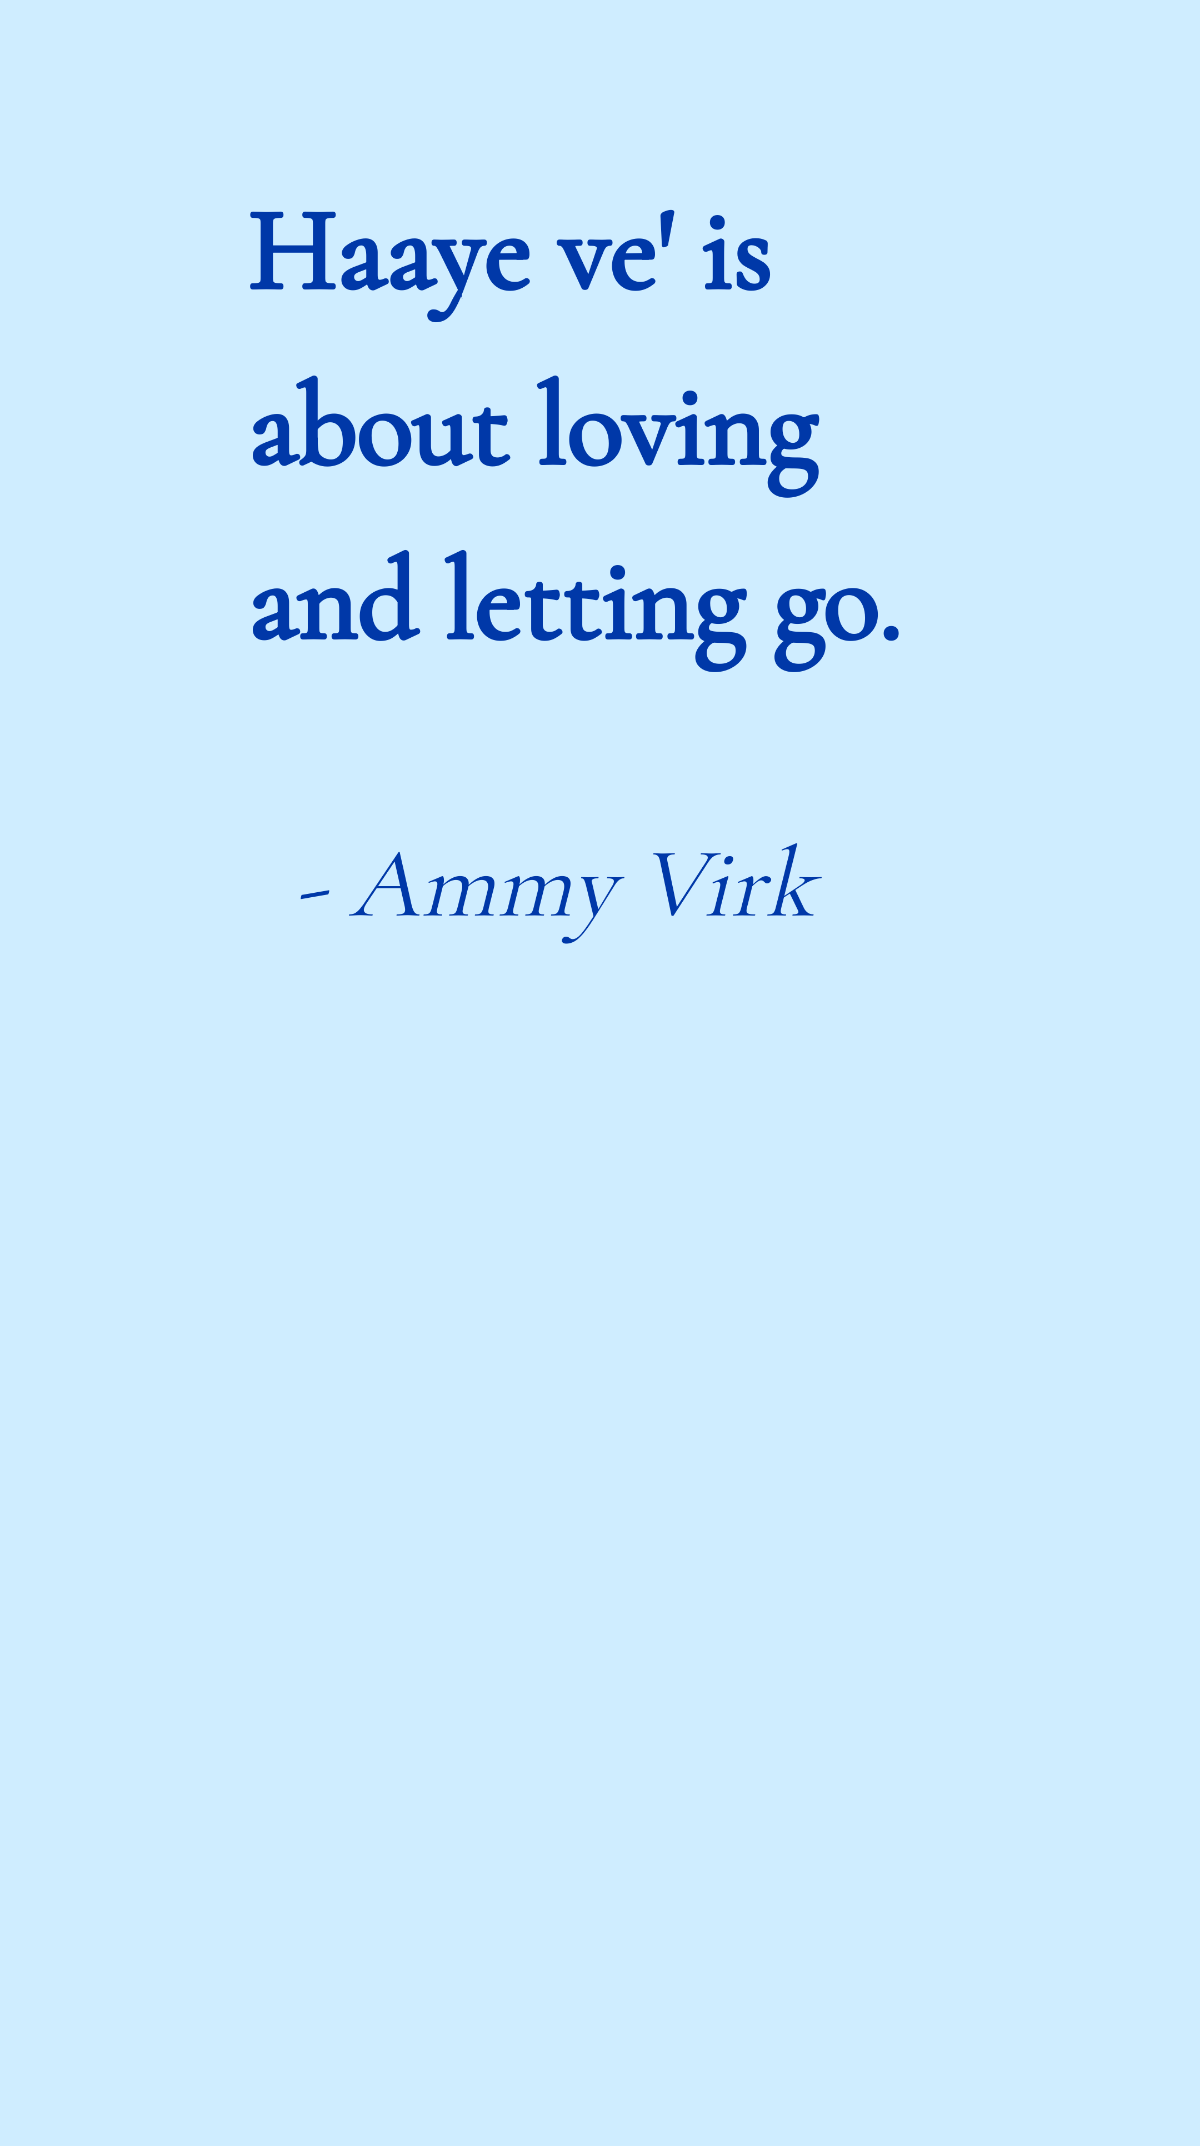 Free Ammy Virk - Haaye ve' is about loving and letting go. Template